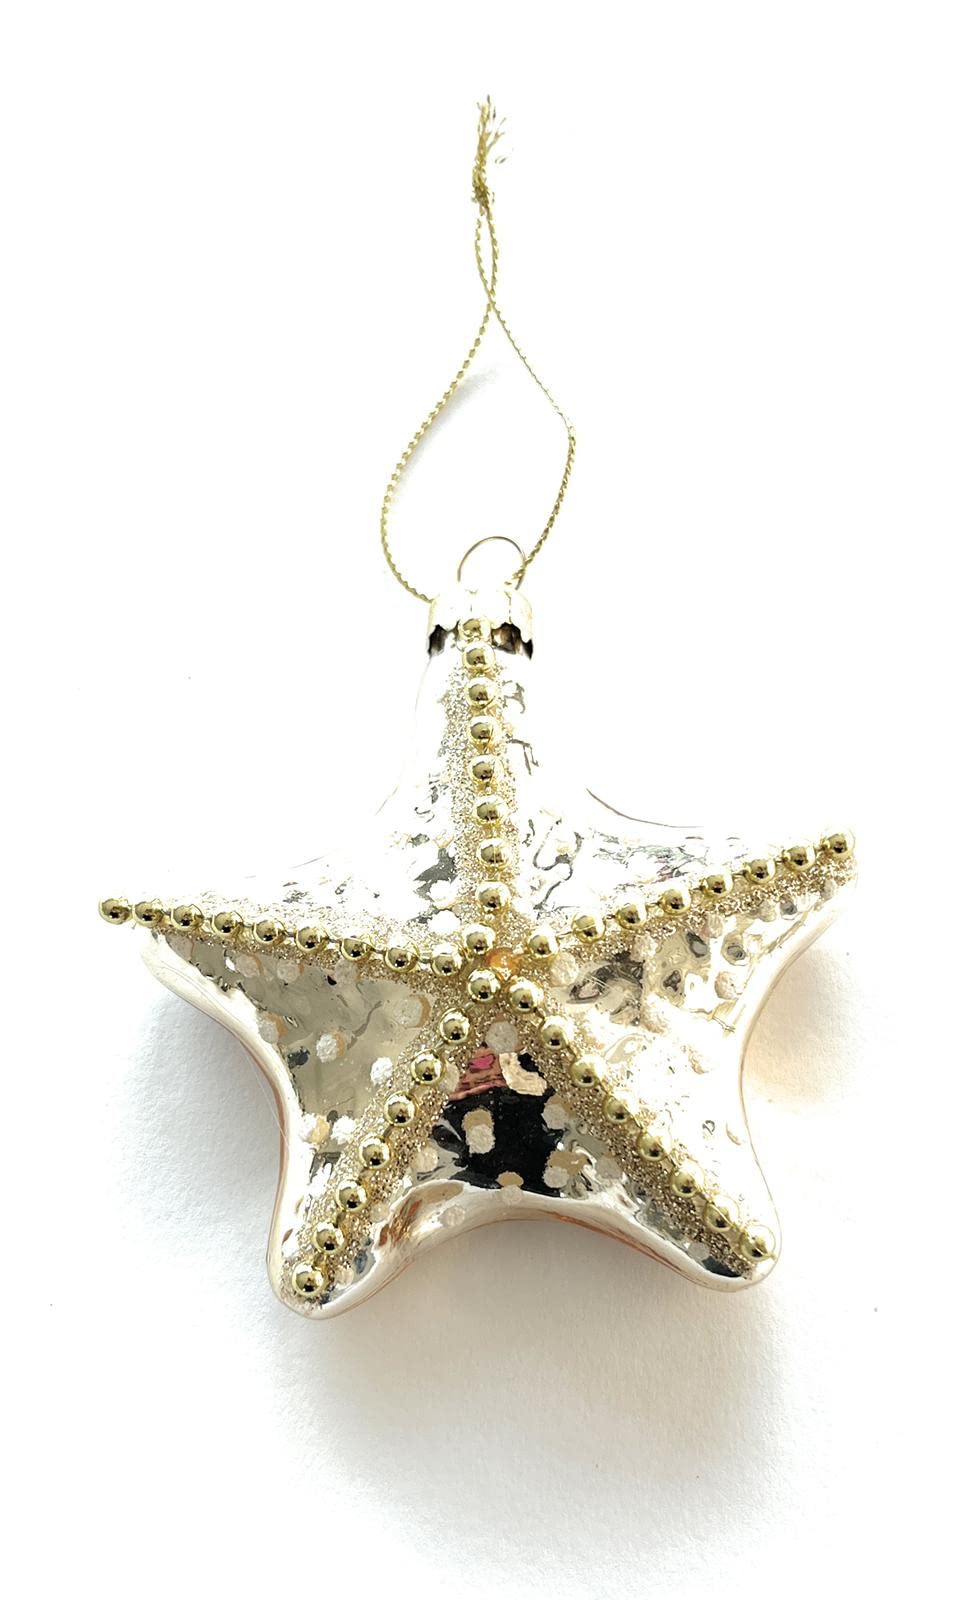 Christmas decorations - 2 pack Starfish with beads and glitter (8x8x2.5cm)